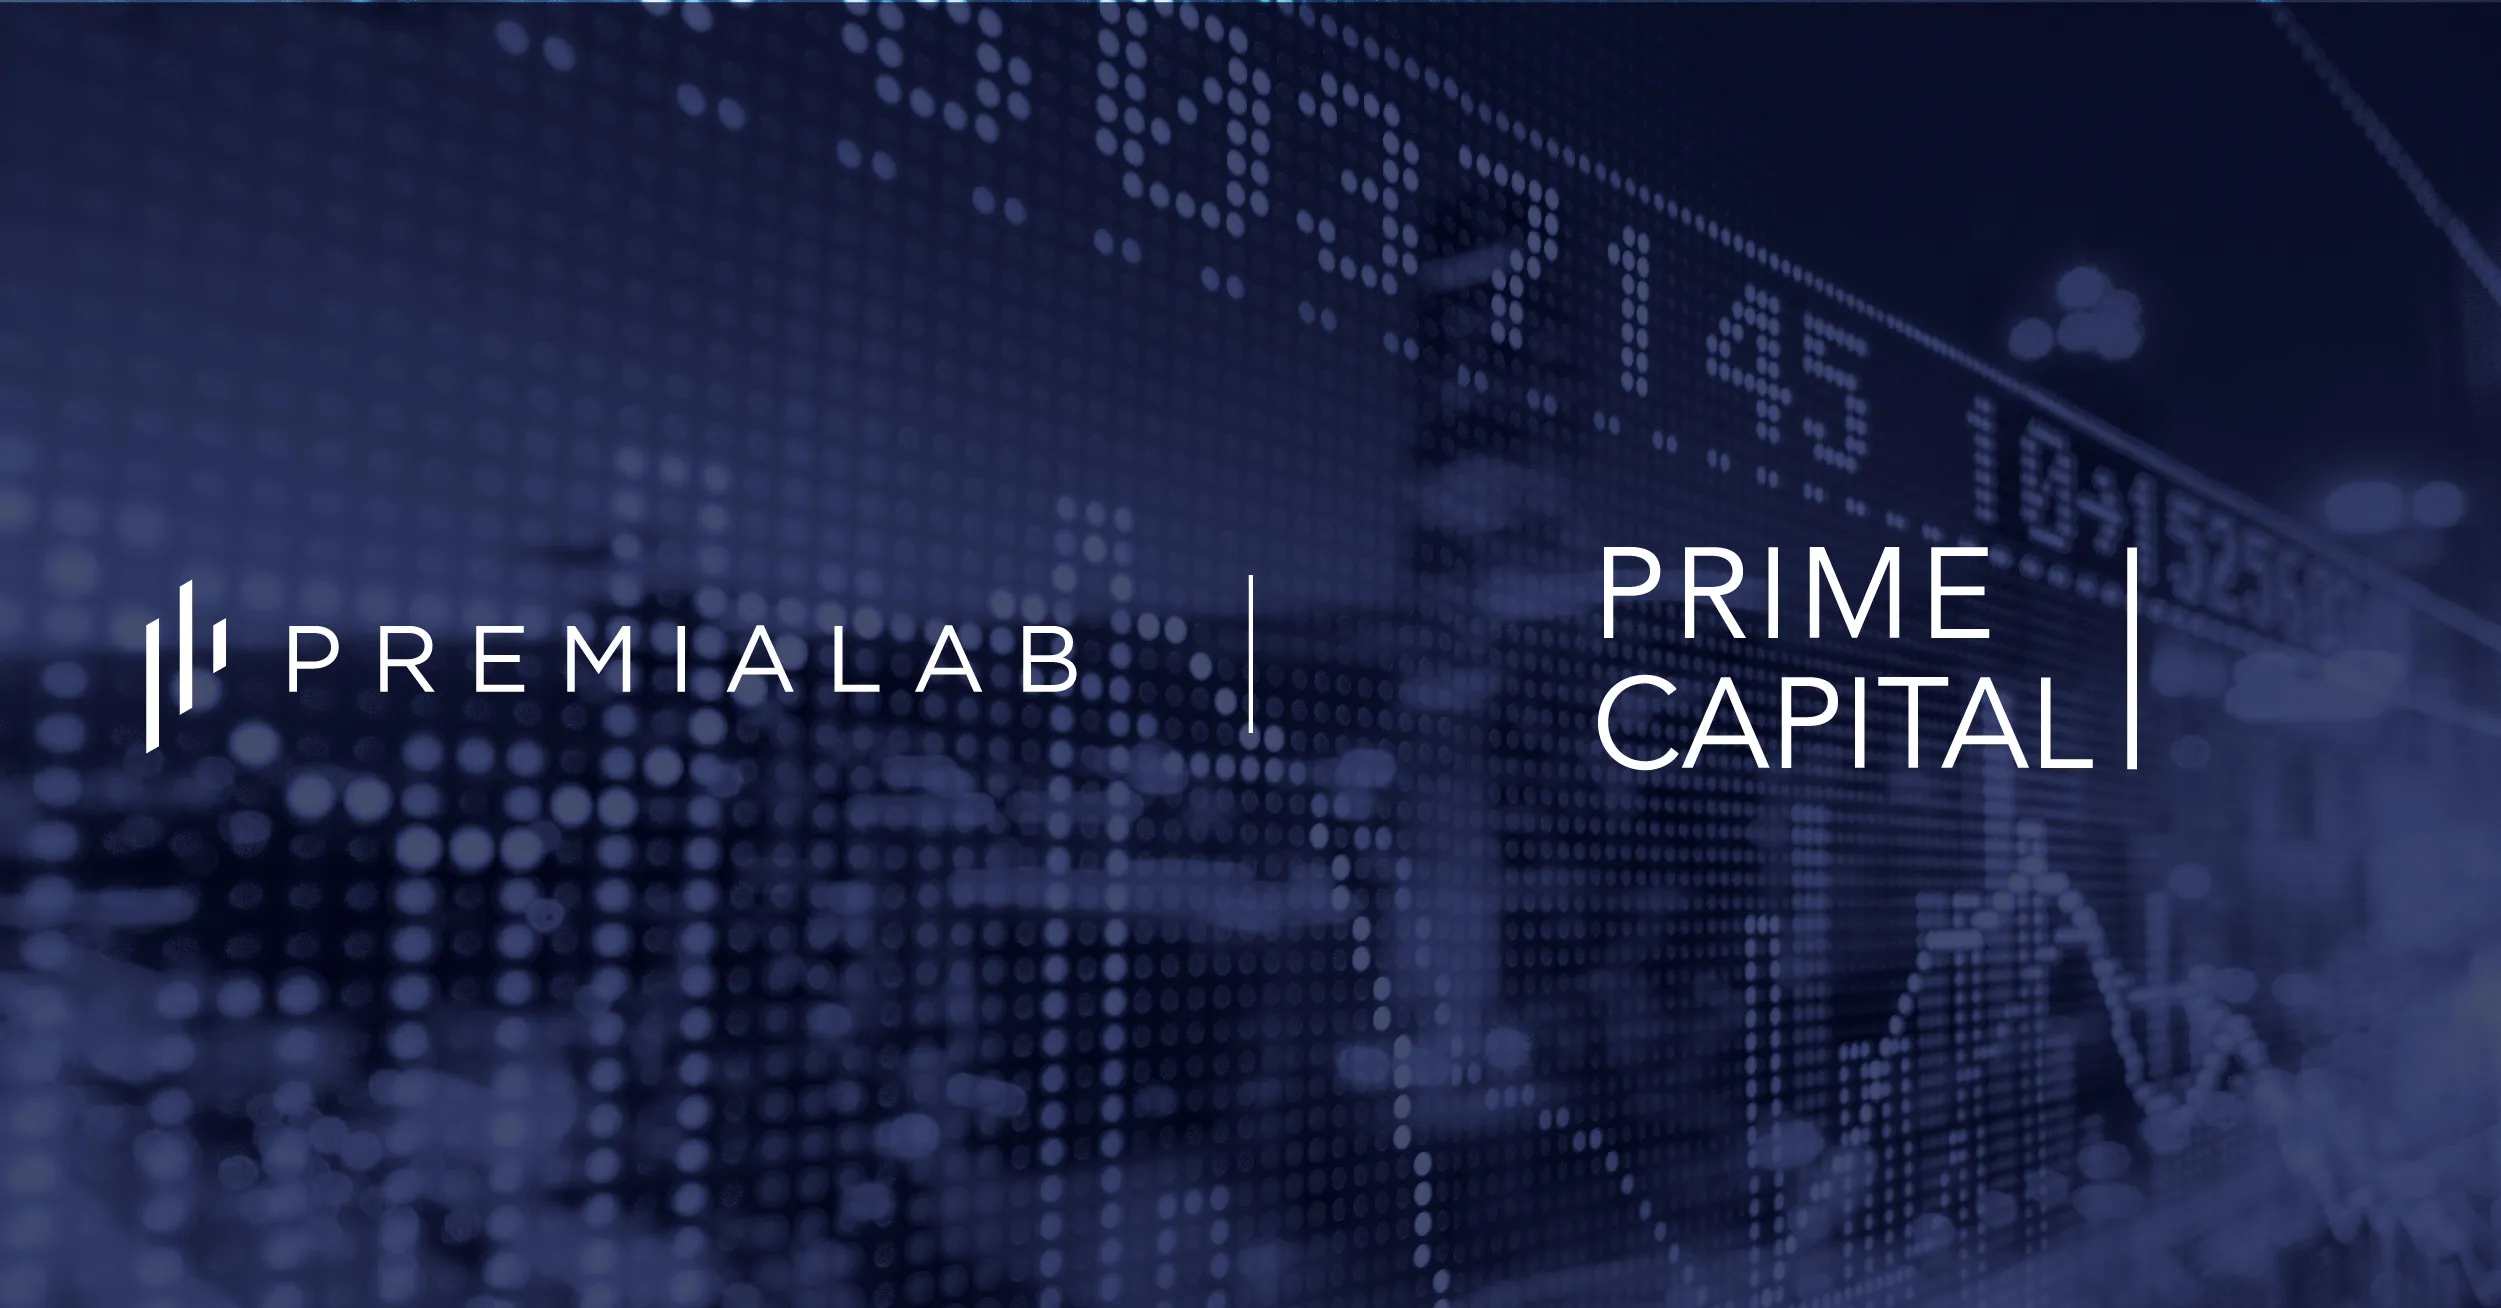 Prime Capital AG Enhances Alternative Investment Strategies with Premialab's Advanced Analytics